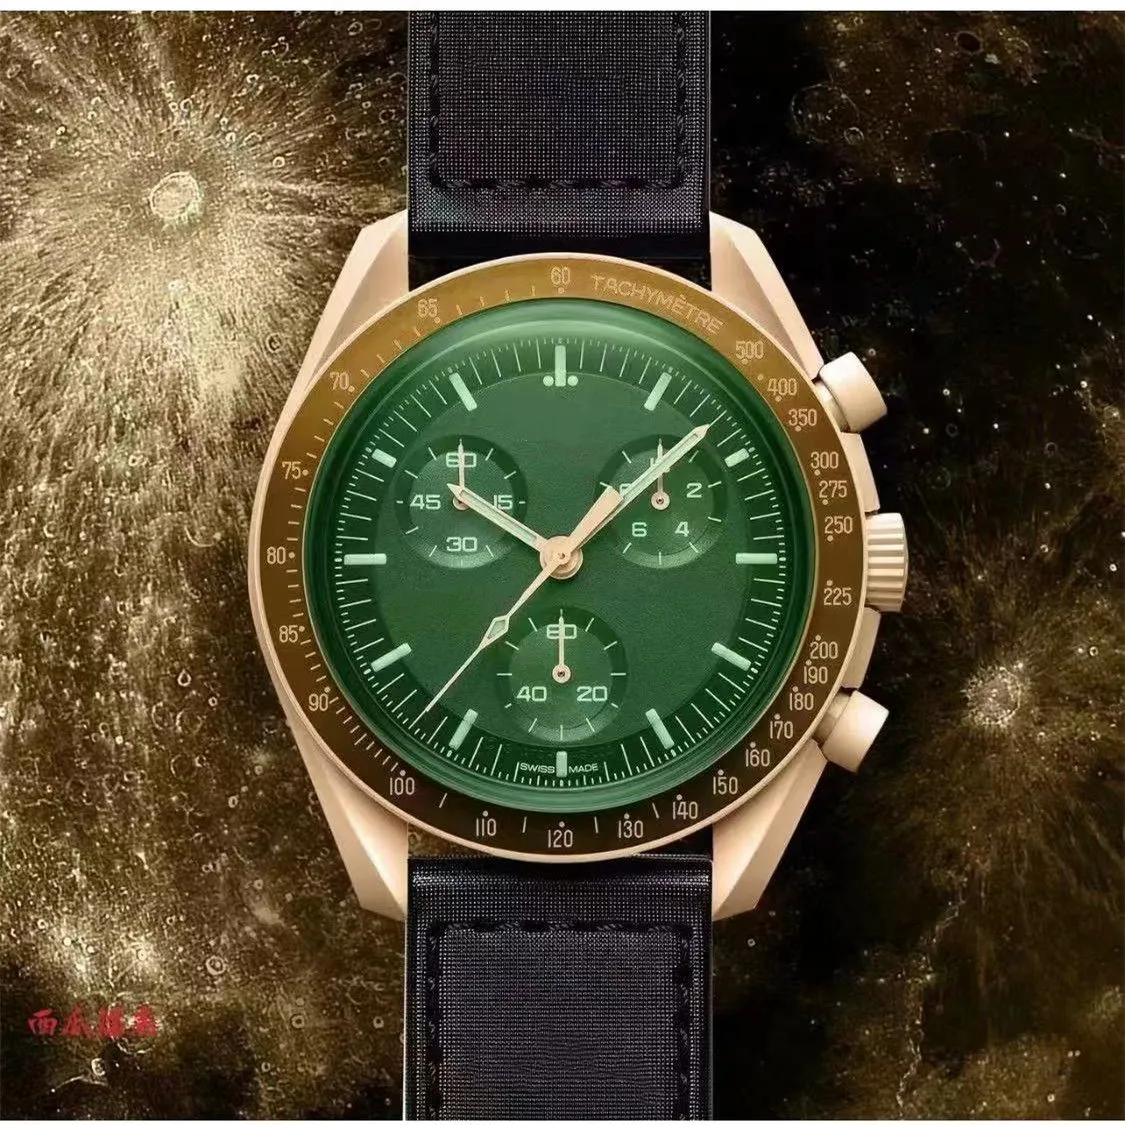 2023 Bioceramic Planet Moon Quarz Watch Mission To Mercury 42mm Full Function Chronograph Luxury Mens couple joint name Wristwatches Moonshine Gold Moon watch